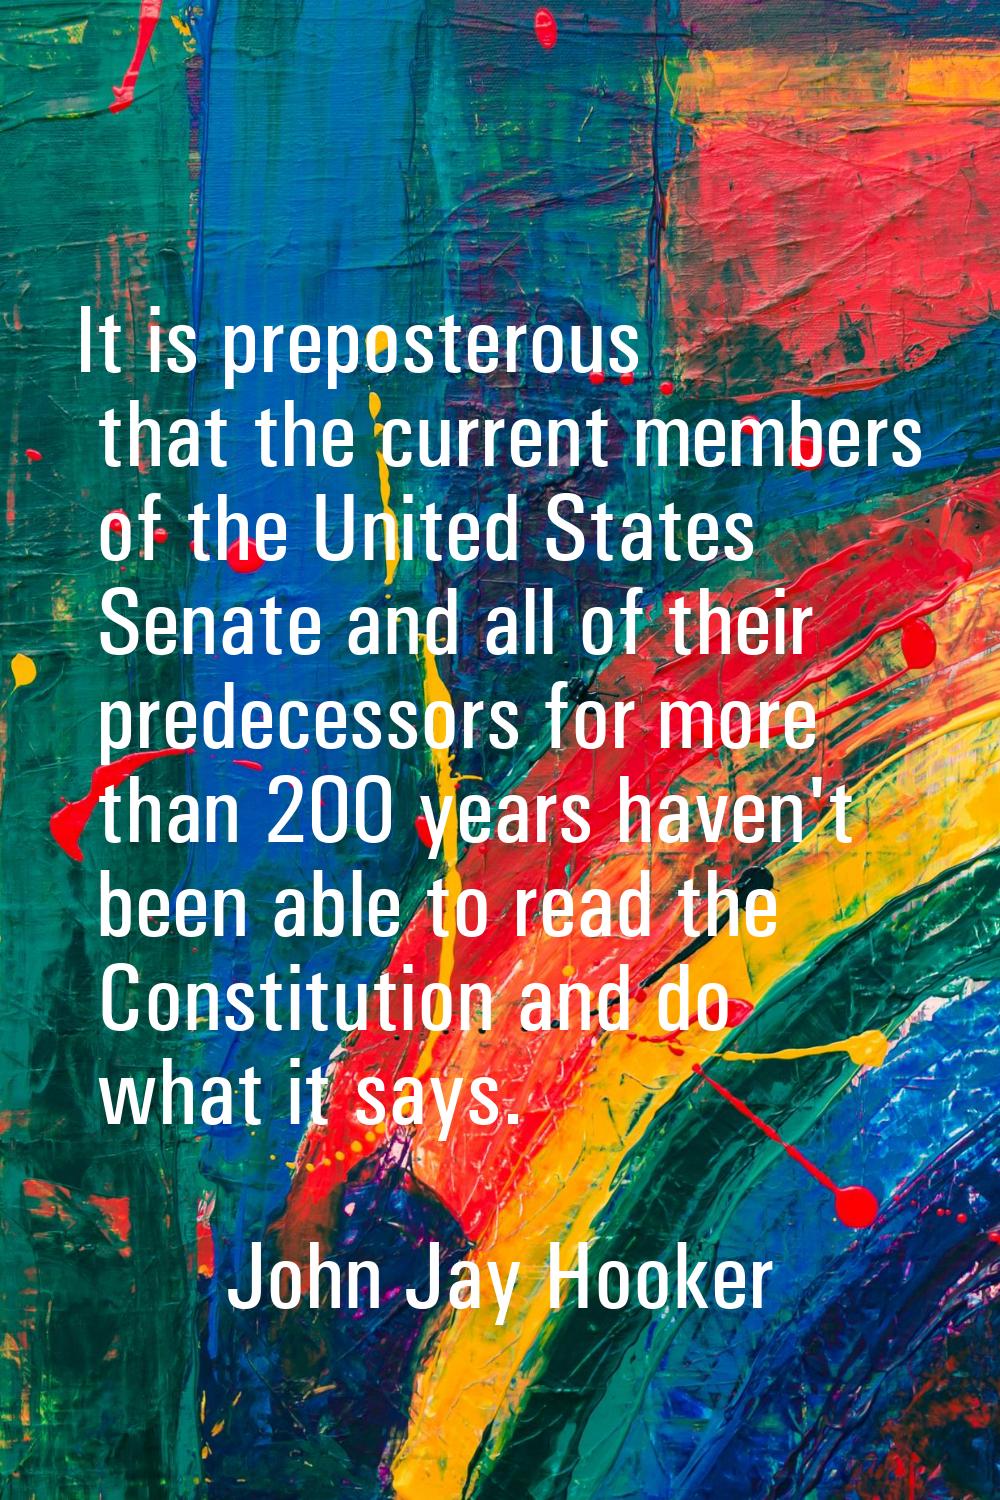 It is preposterous that the current members of the United States Senate and all of their predecesso